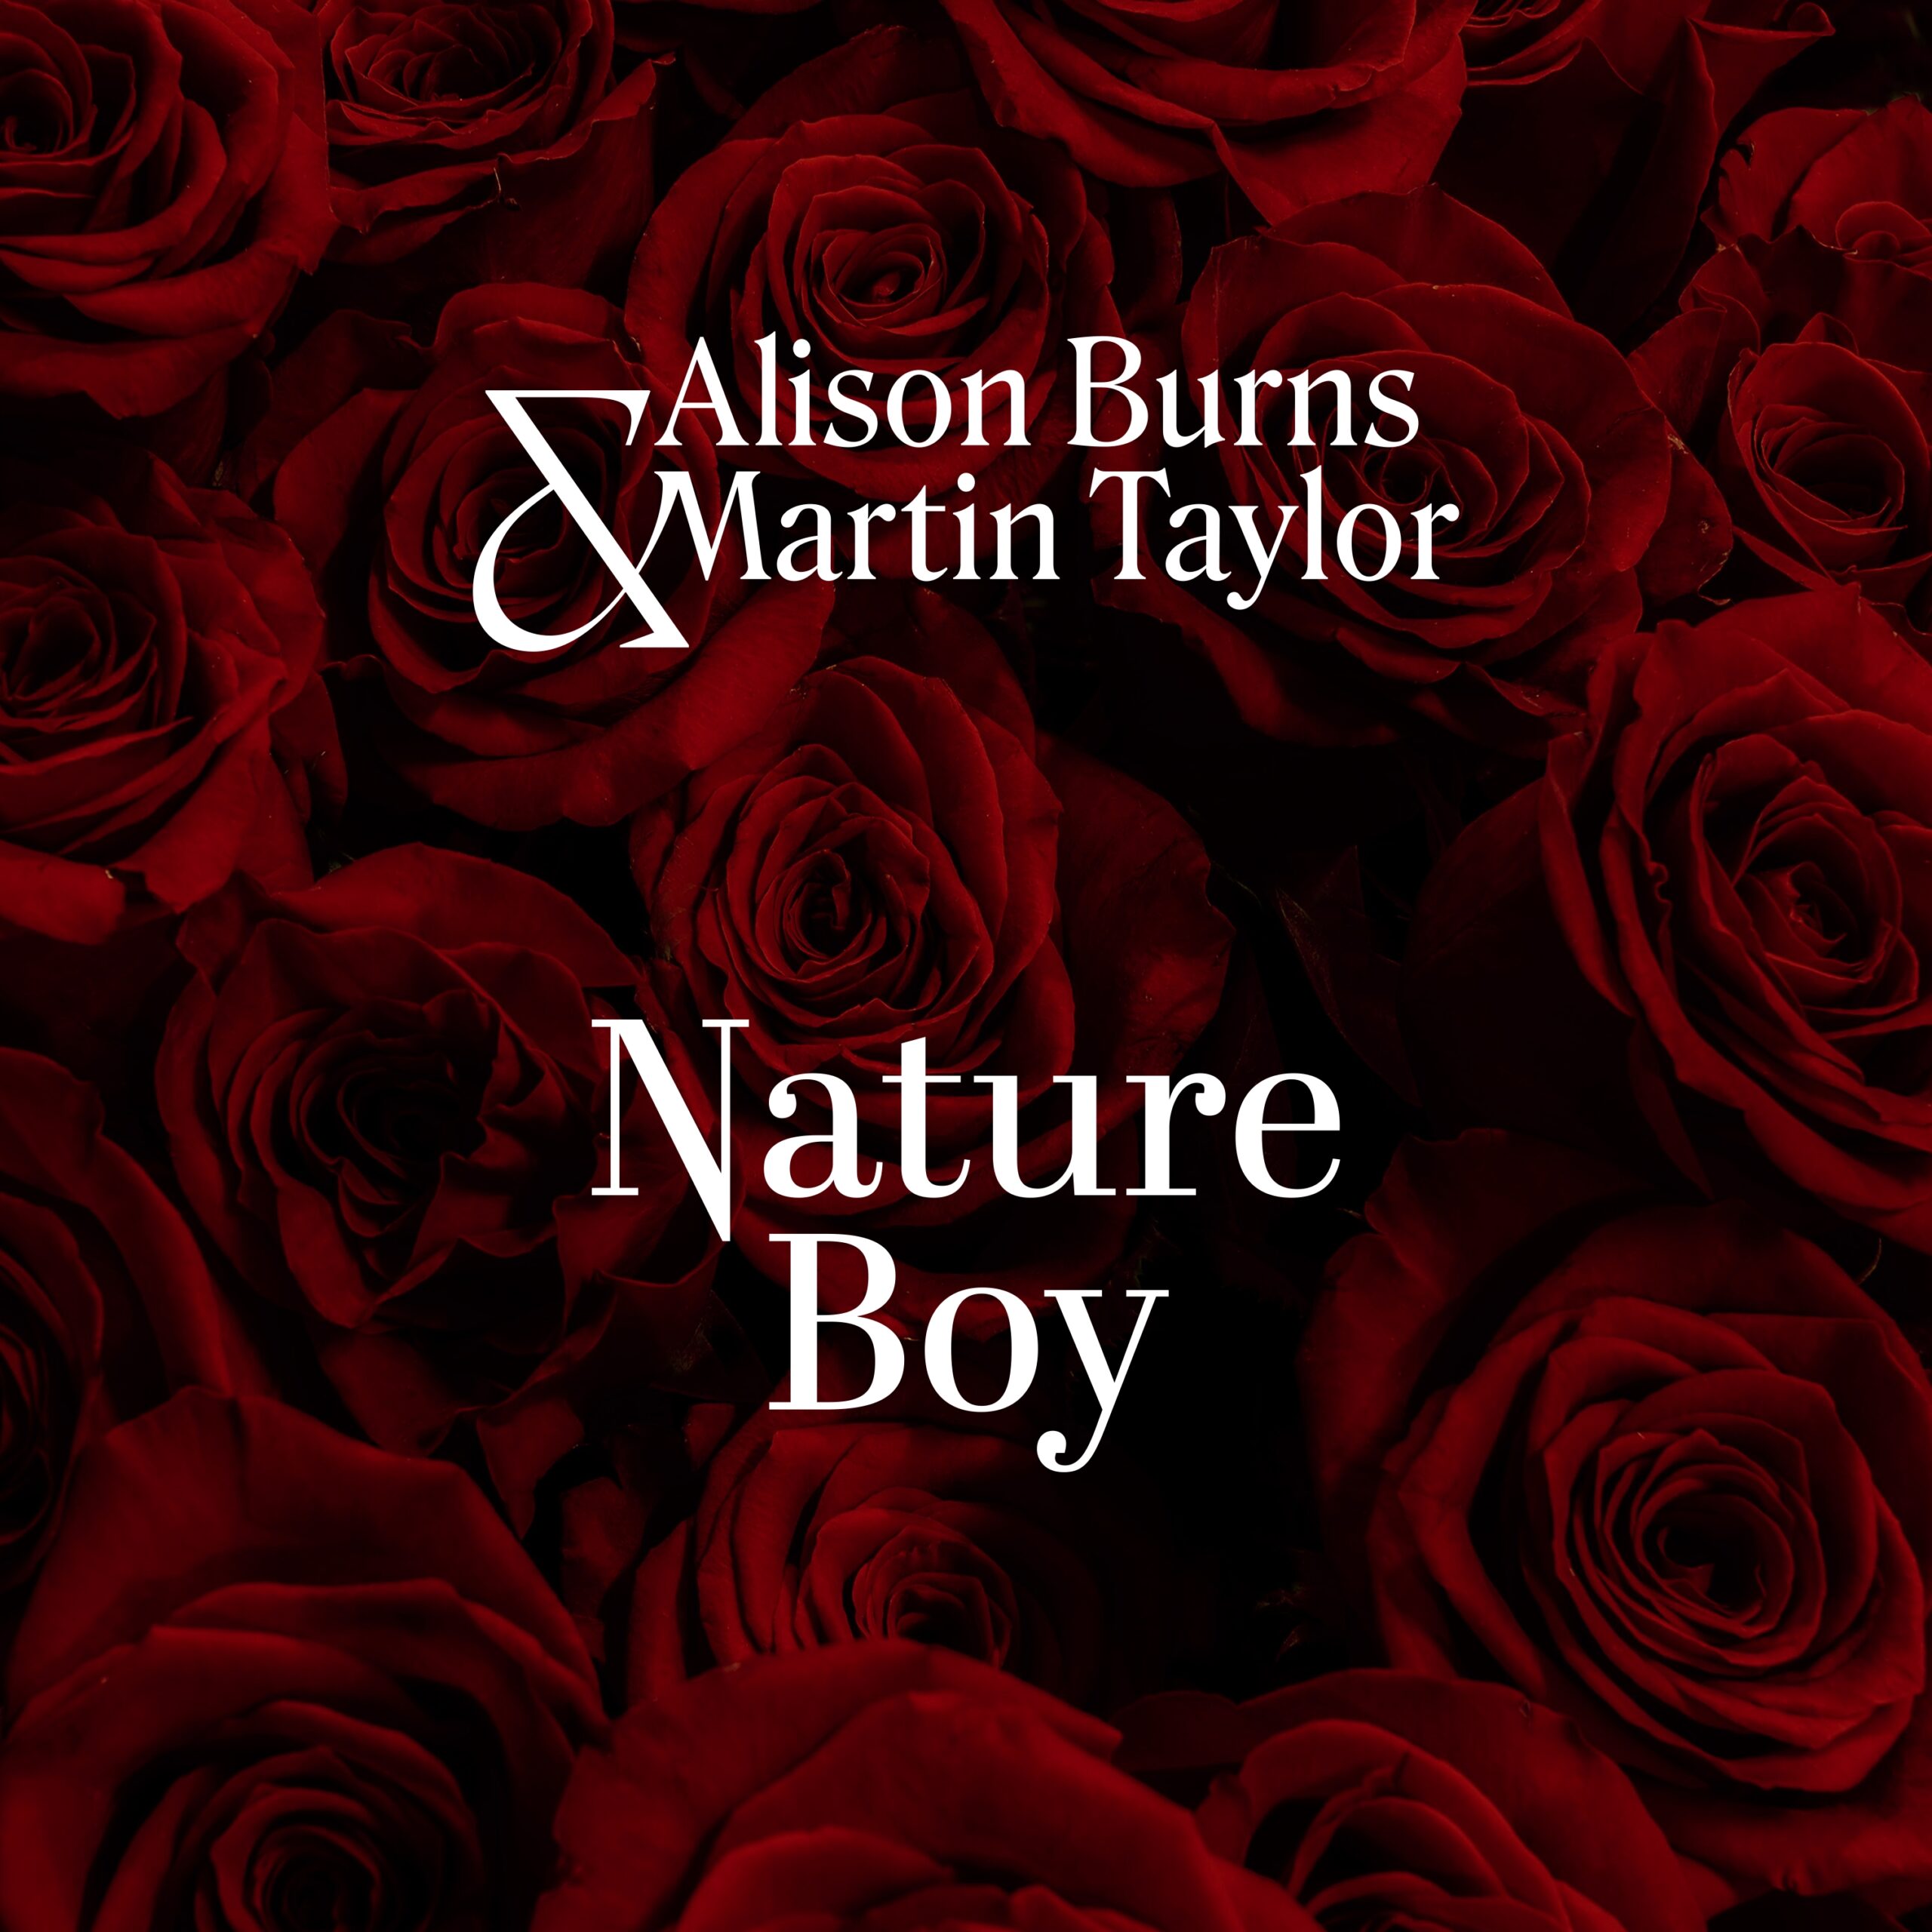 Nature Boy by Alison Burns and Martin Taylor